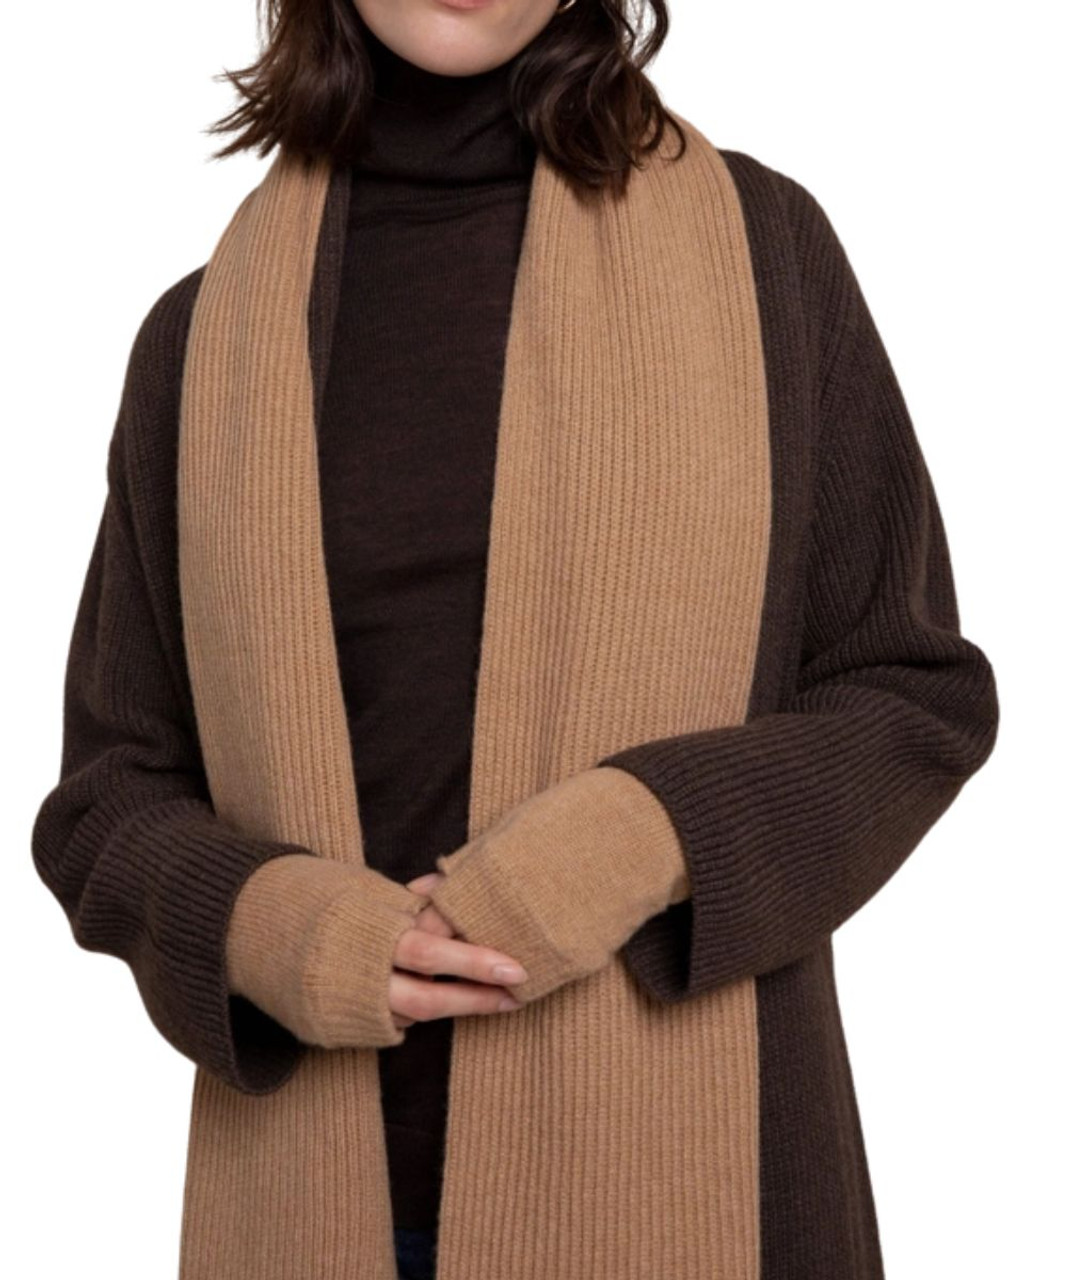 The Cashmere Wool Scarf